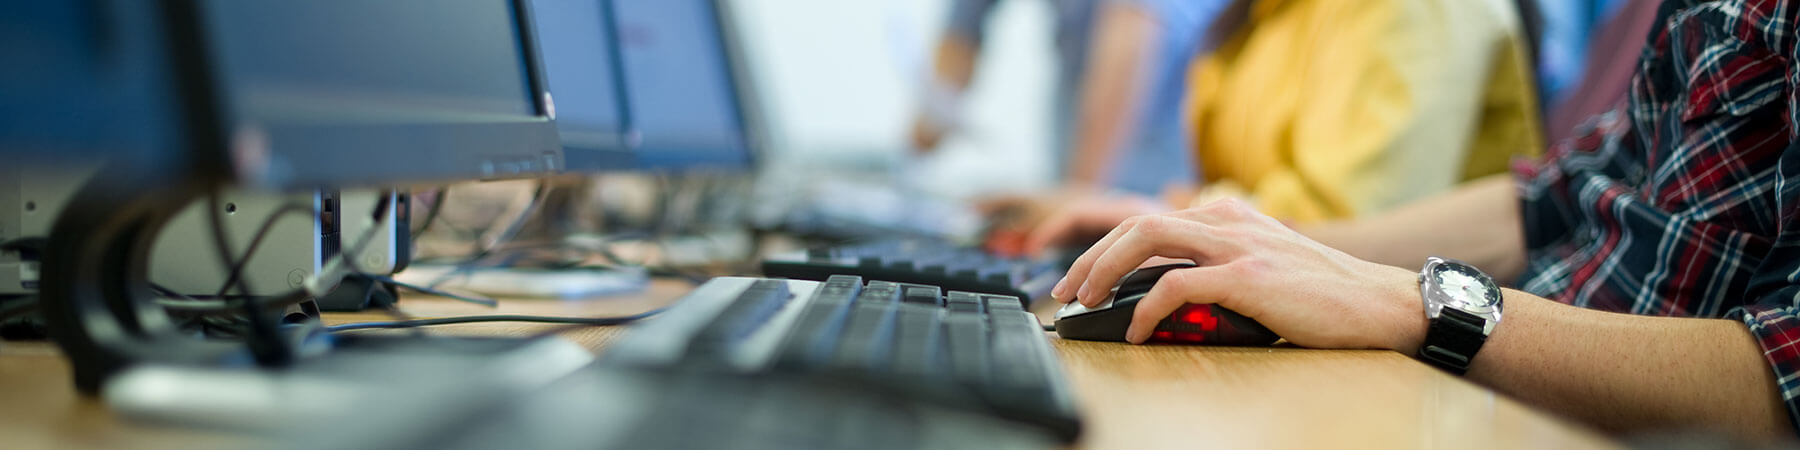 Person using a computer keyboard